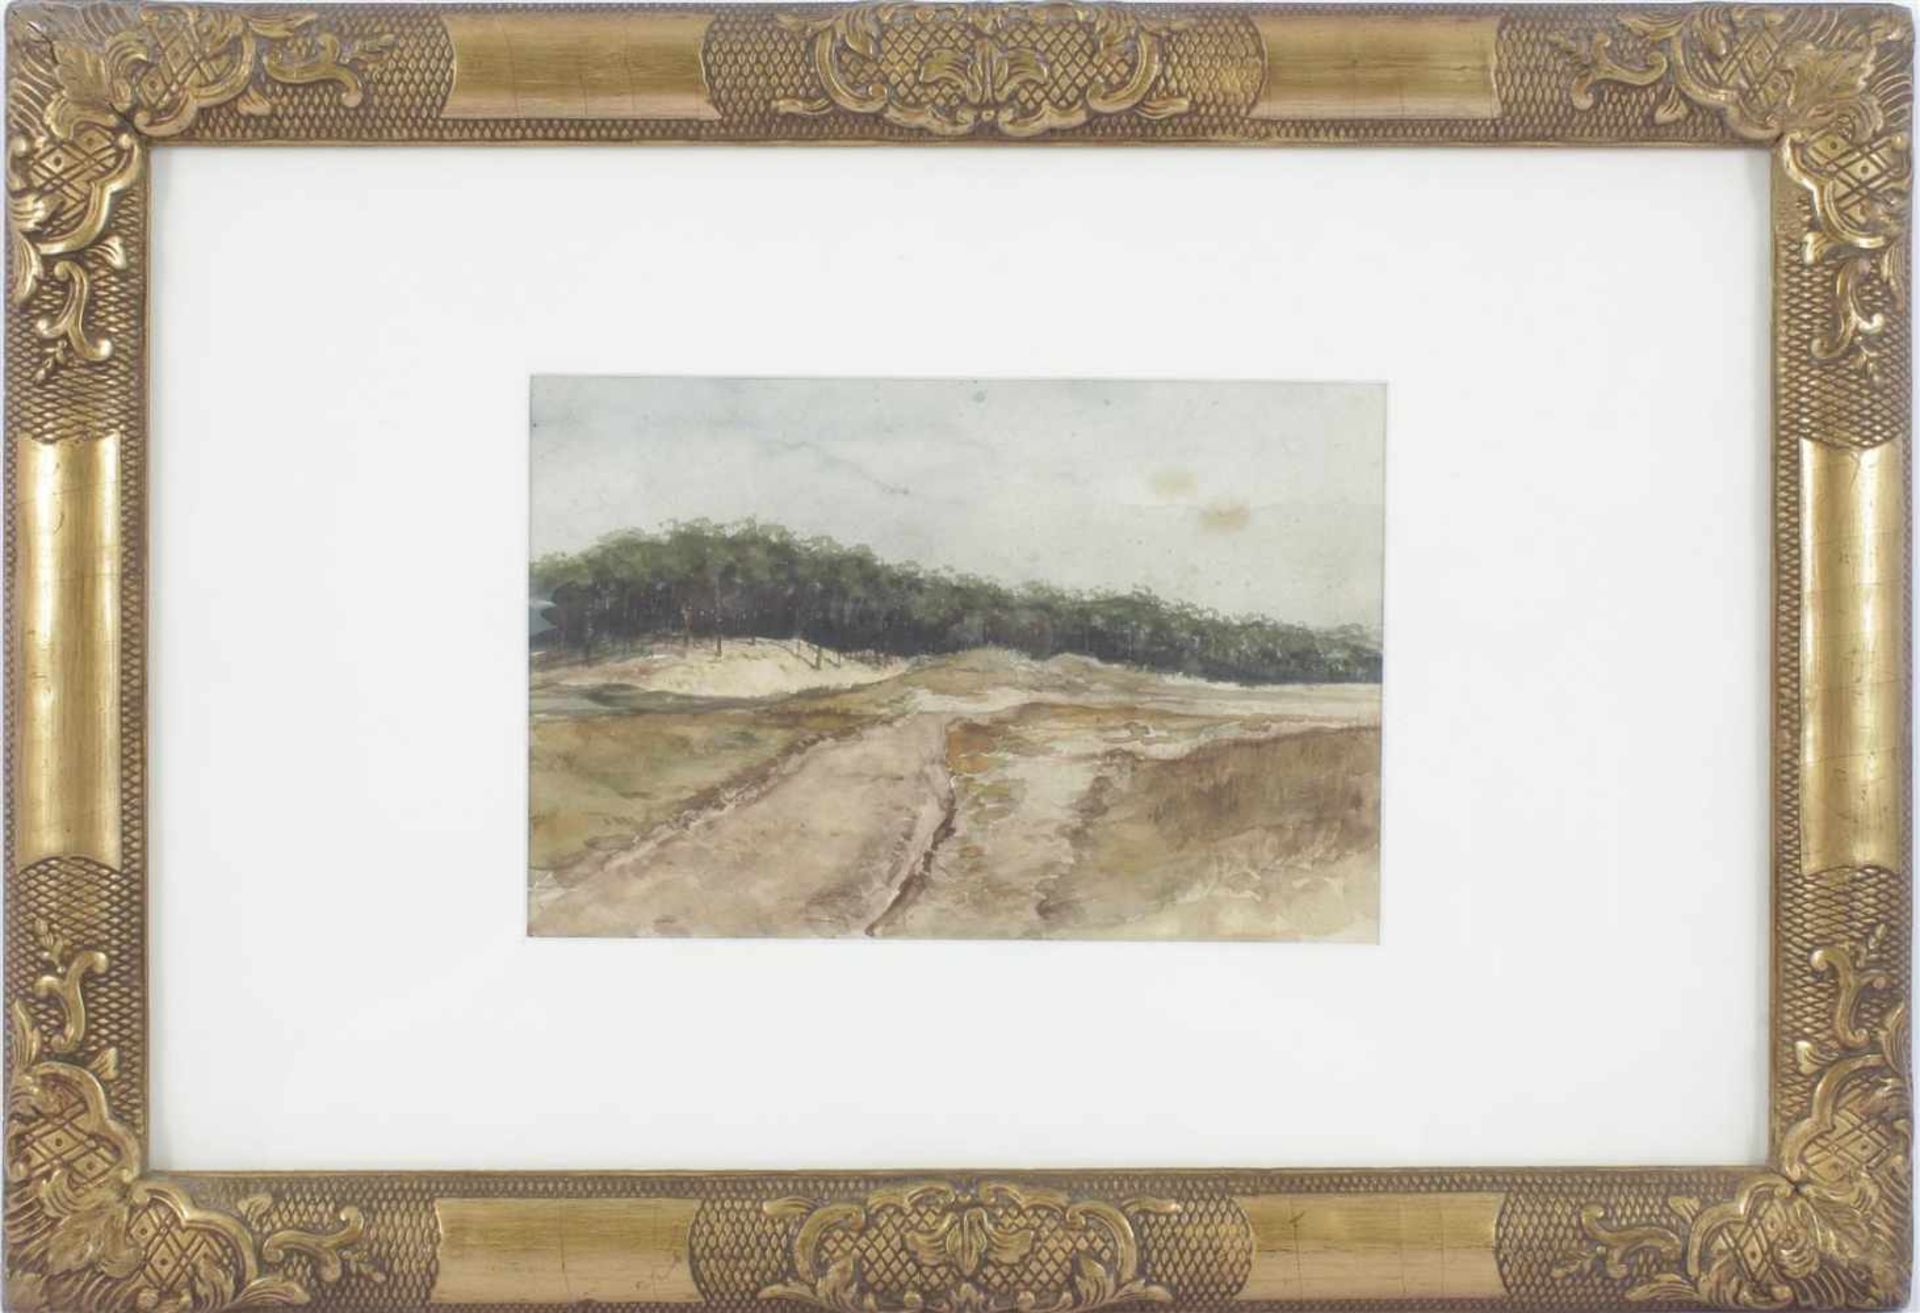 Anonymous, Dune Landscape, watercolor 14x22 cm (sticker on the reverse with name Jacob Marid)